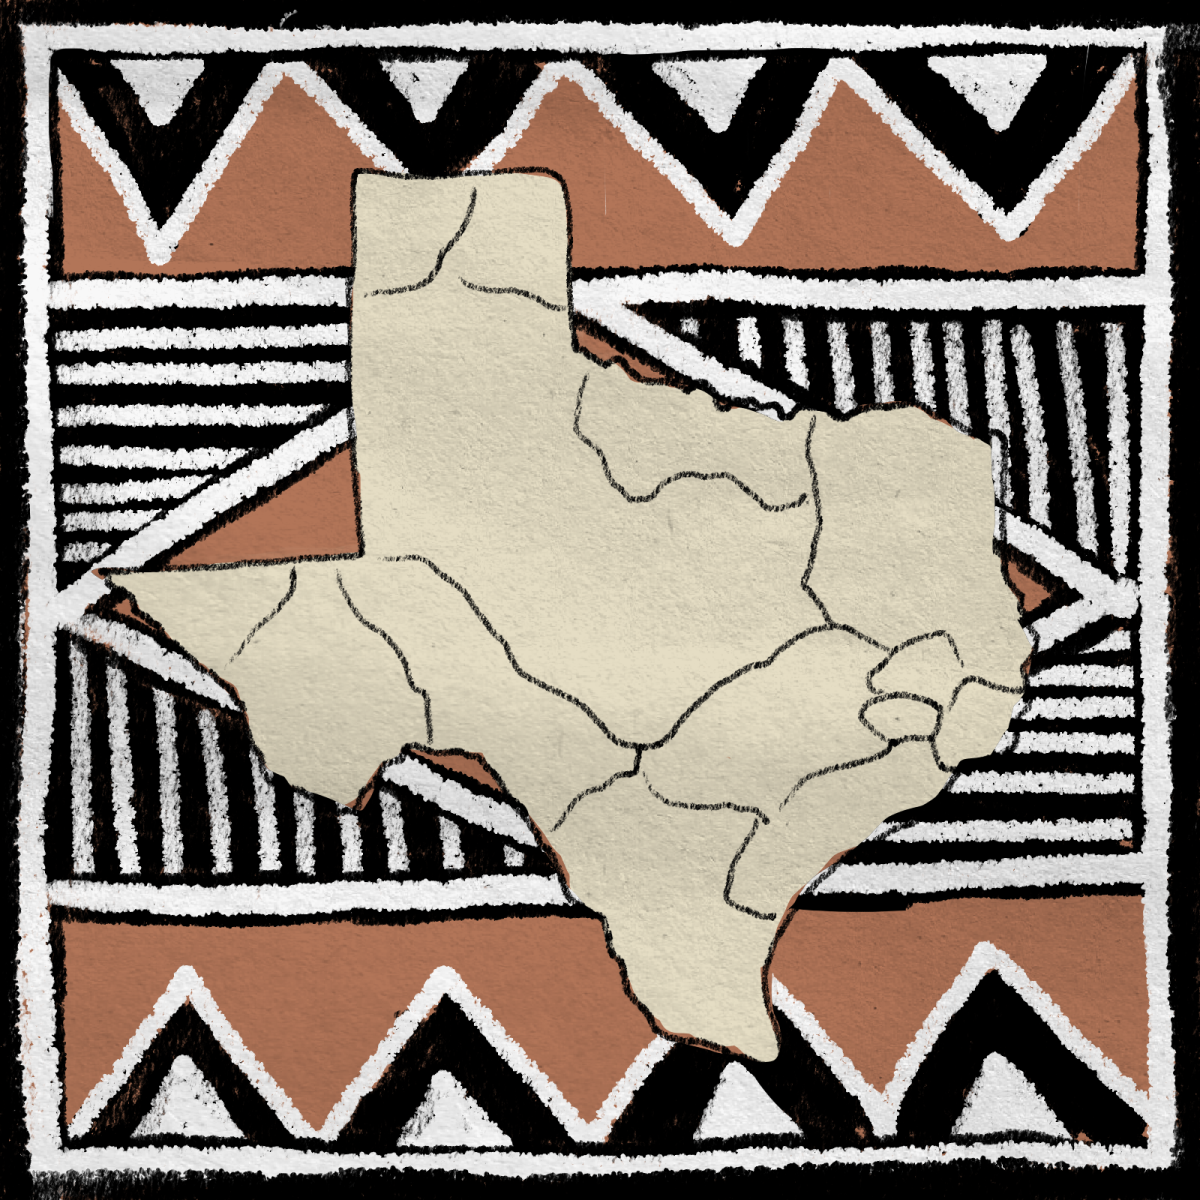 Mapping Indigenous Texas project awarded 2023-2024 Research and Creative Grant